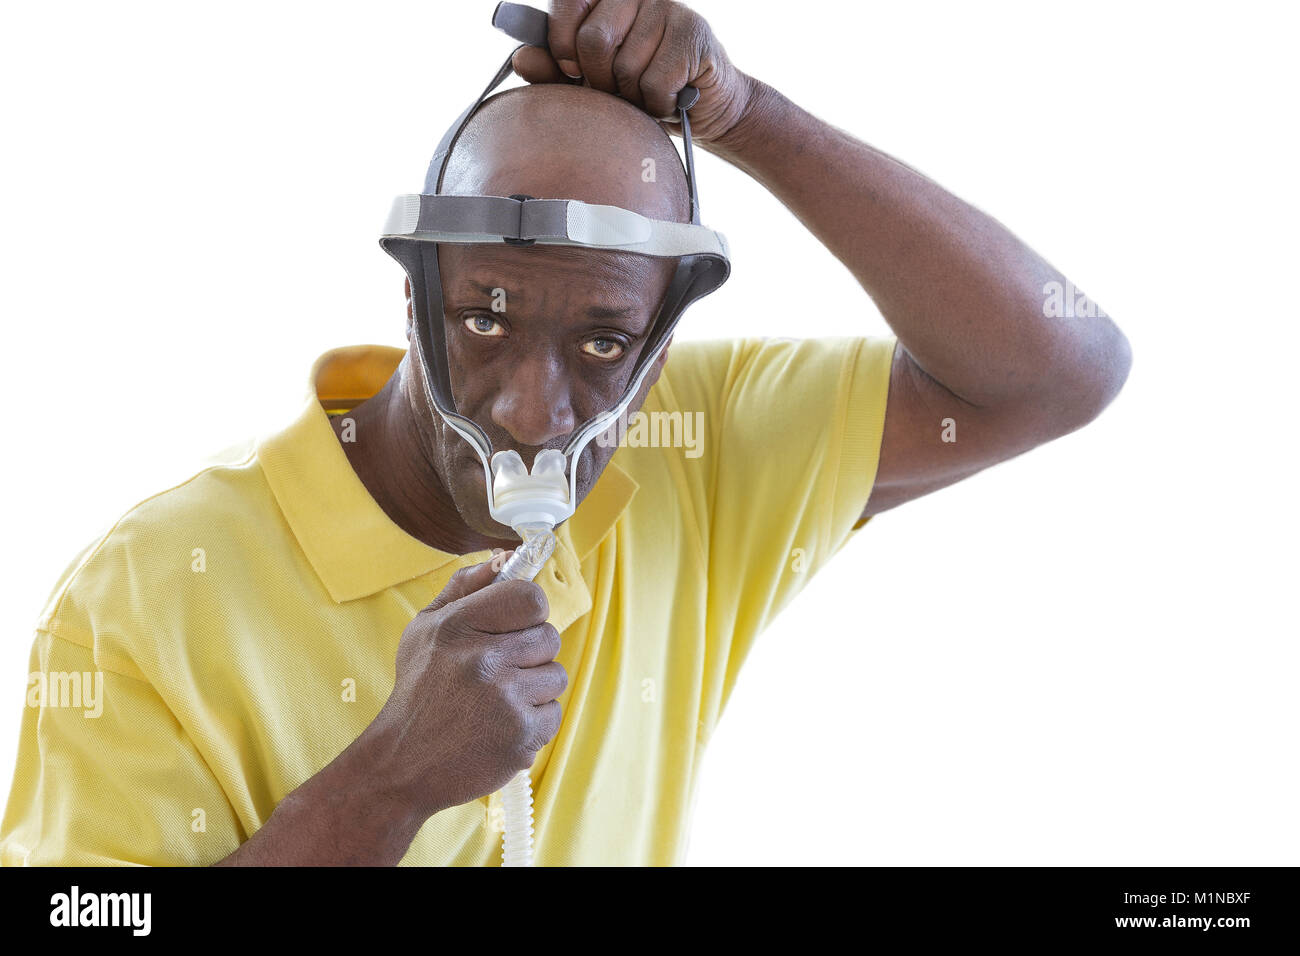 Man with a sleeping disorder tries on a Cpap for the first time,Man learns to adjust his CPAP equipment on white background Stock Photo